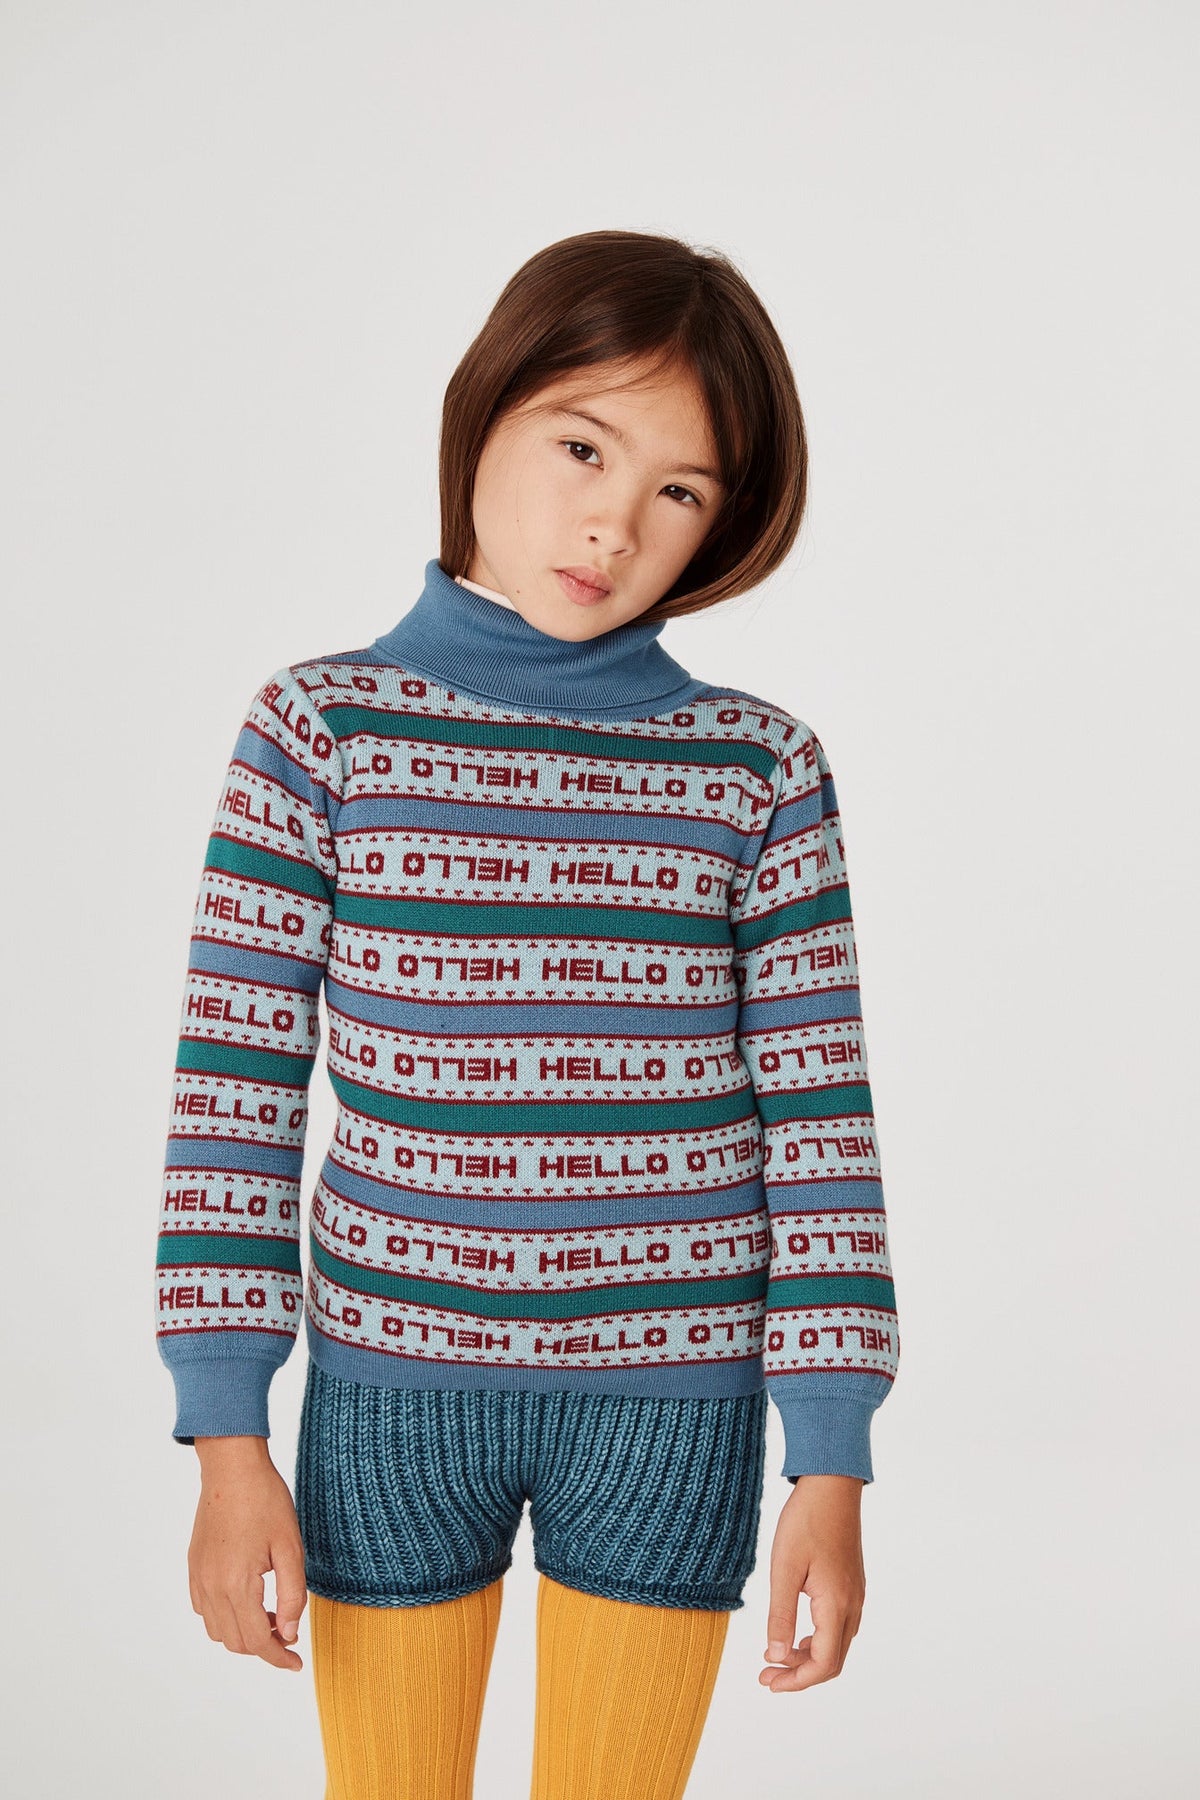 Word Stripe Turtleneck - Dusk+Model is 48 inches tall, 47lbs, wearing a size 4-5y